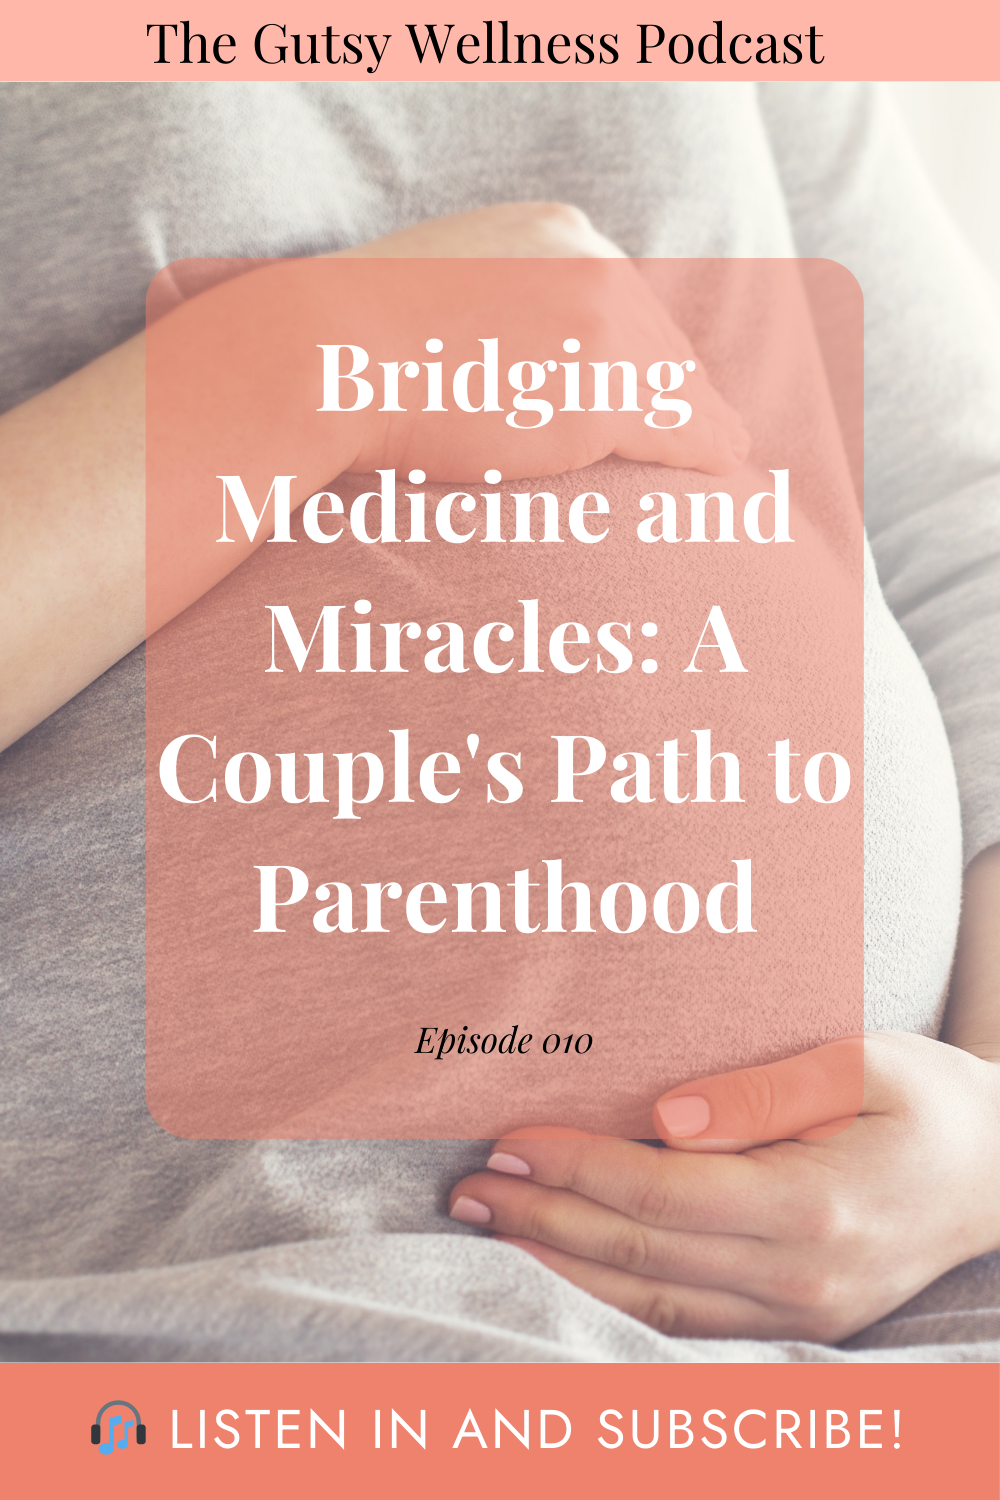 Bridging Medicine and Miracles: A Couple’s Path to Parenthood with Dr Jeanie Schlafly